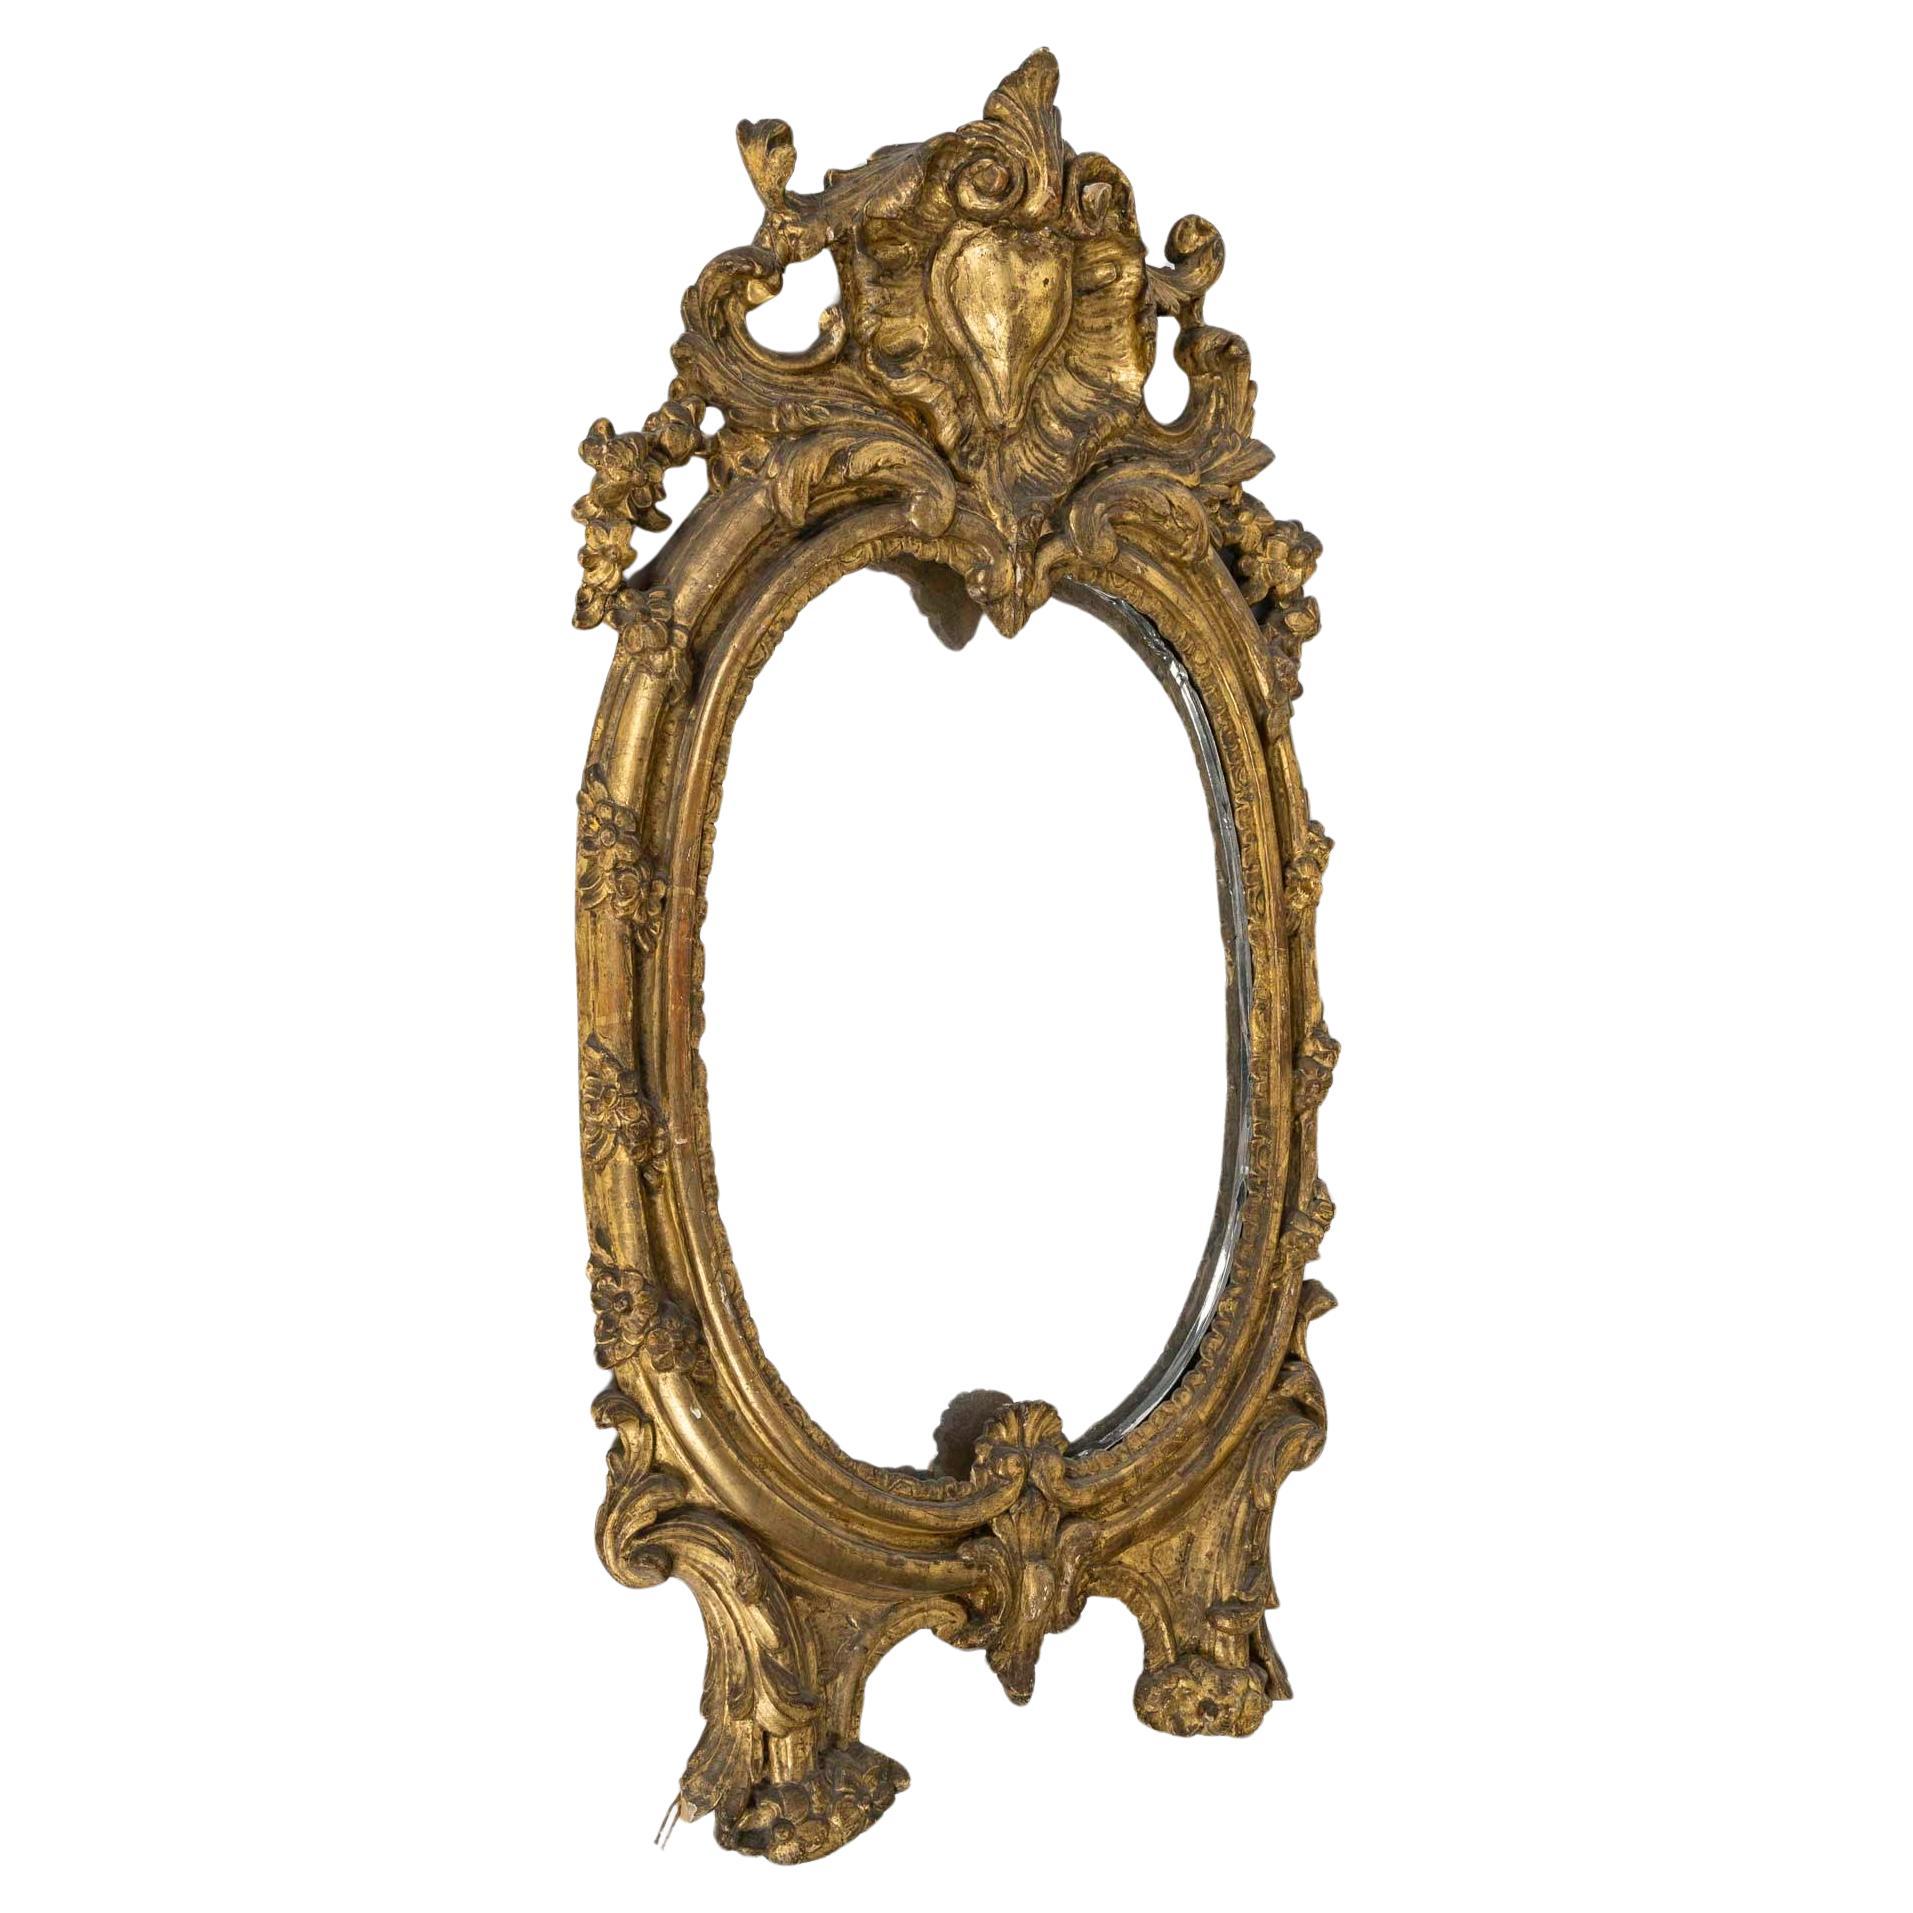 A Louis XV Period Carved and Gilded Wood Wall Mirror, 18th Century.